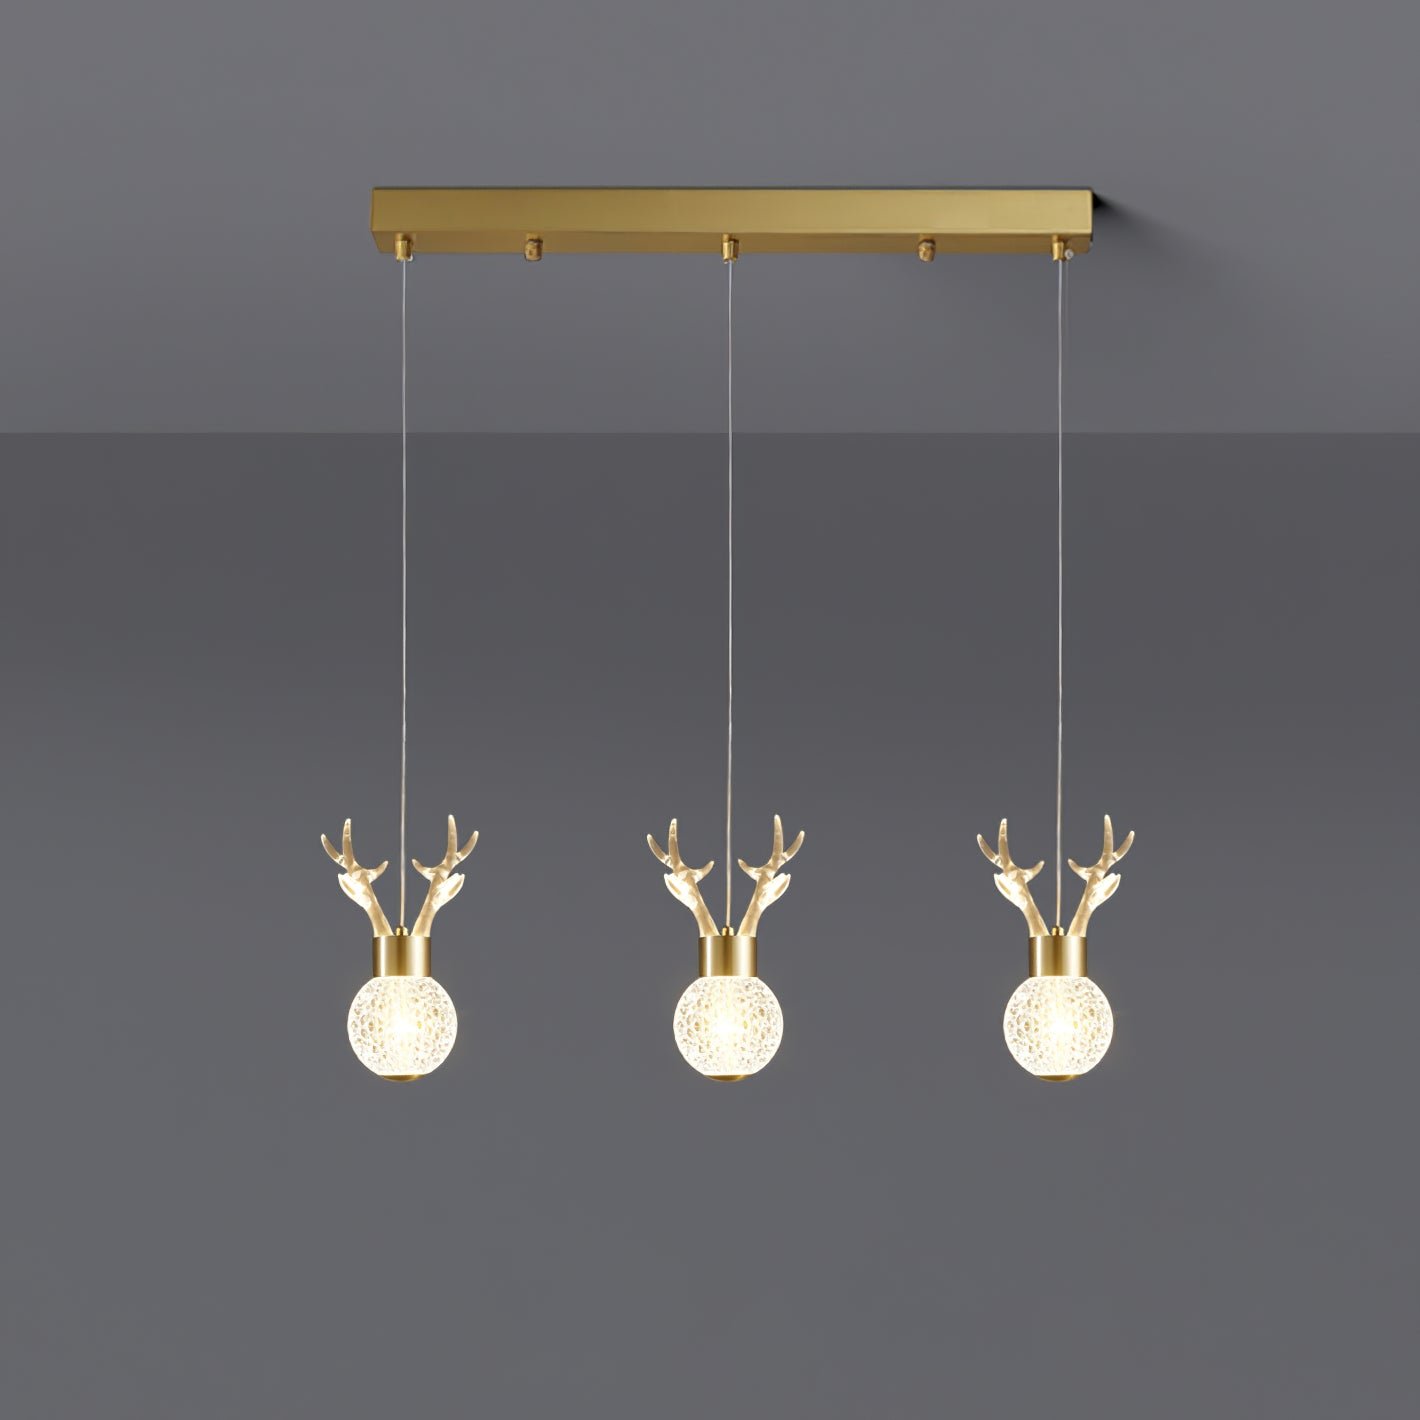 Modern Textured Pendant Lamp with 3 Deer Heads, Large Size: 19.6″ x 78.7″ (50cm x 200cm), Emits Stylish Cool White Light